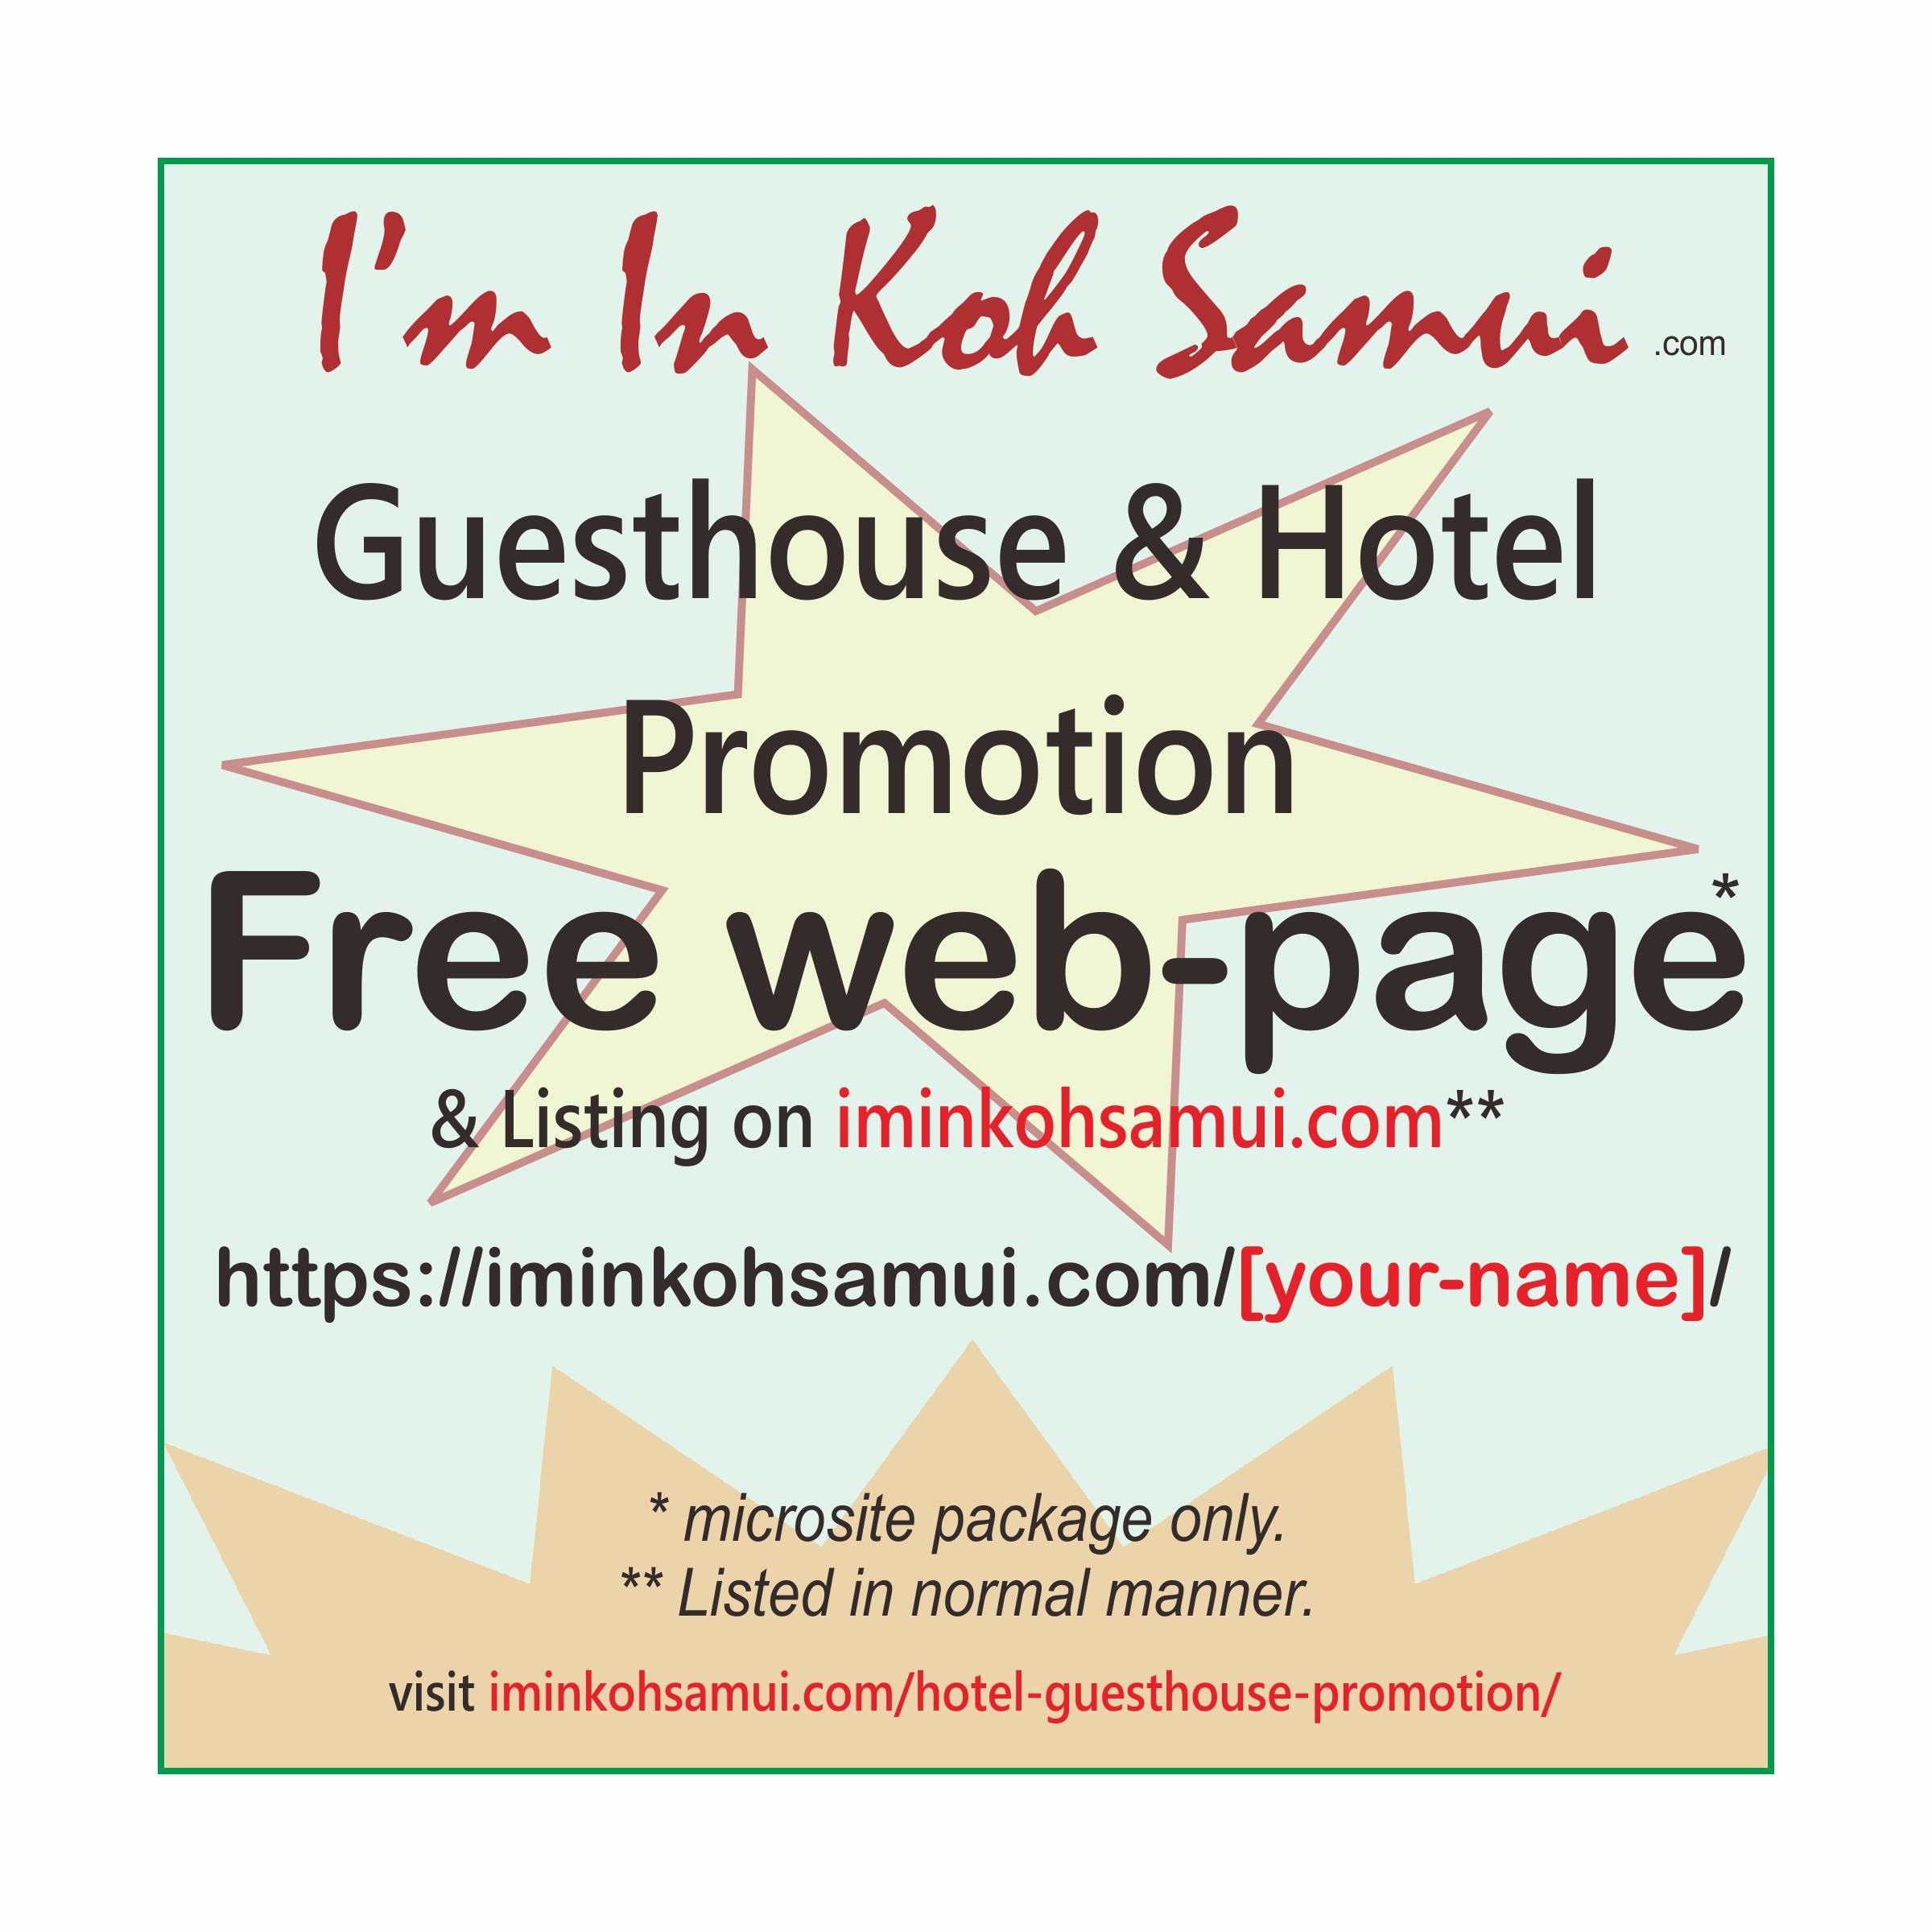 Hotel Guesthouse promotion